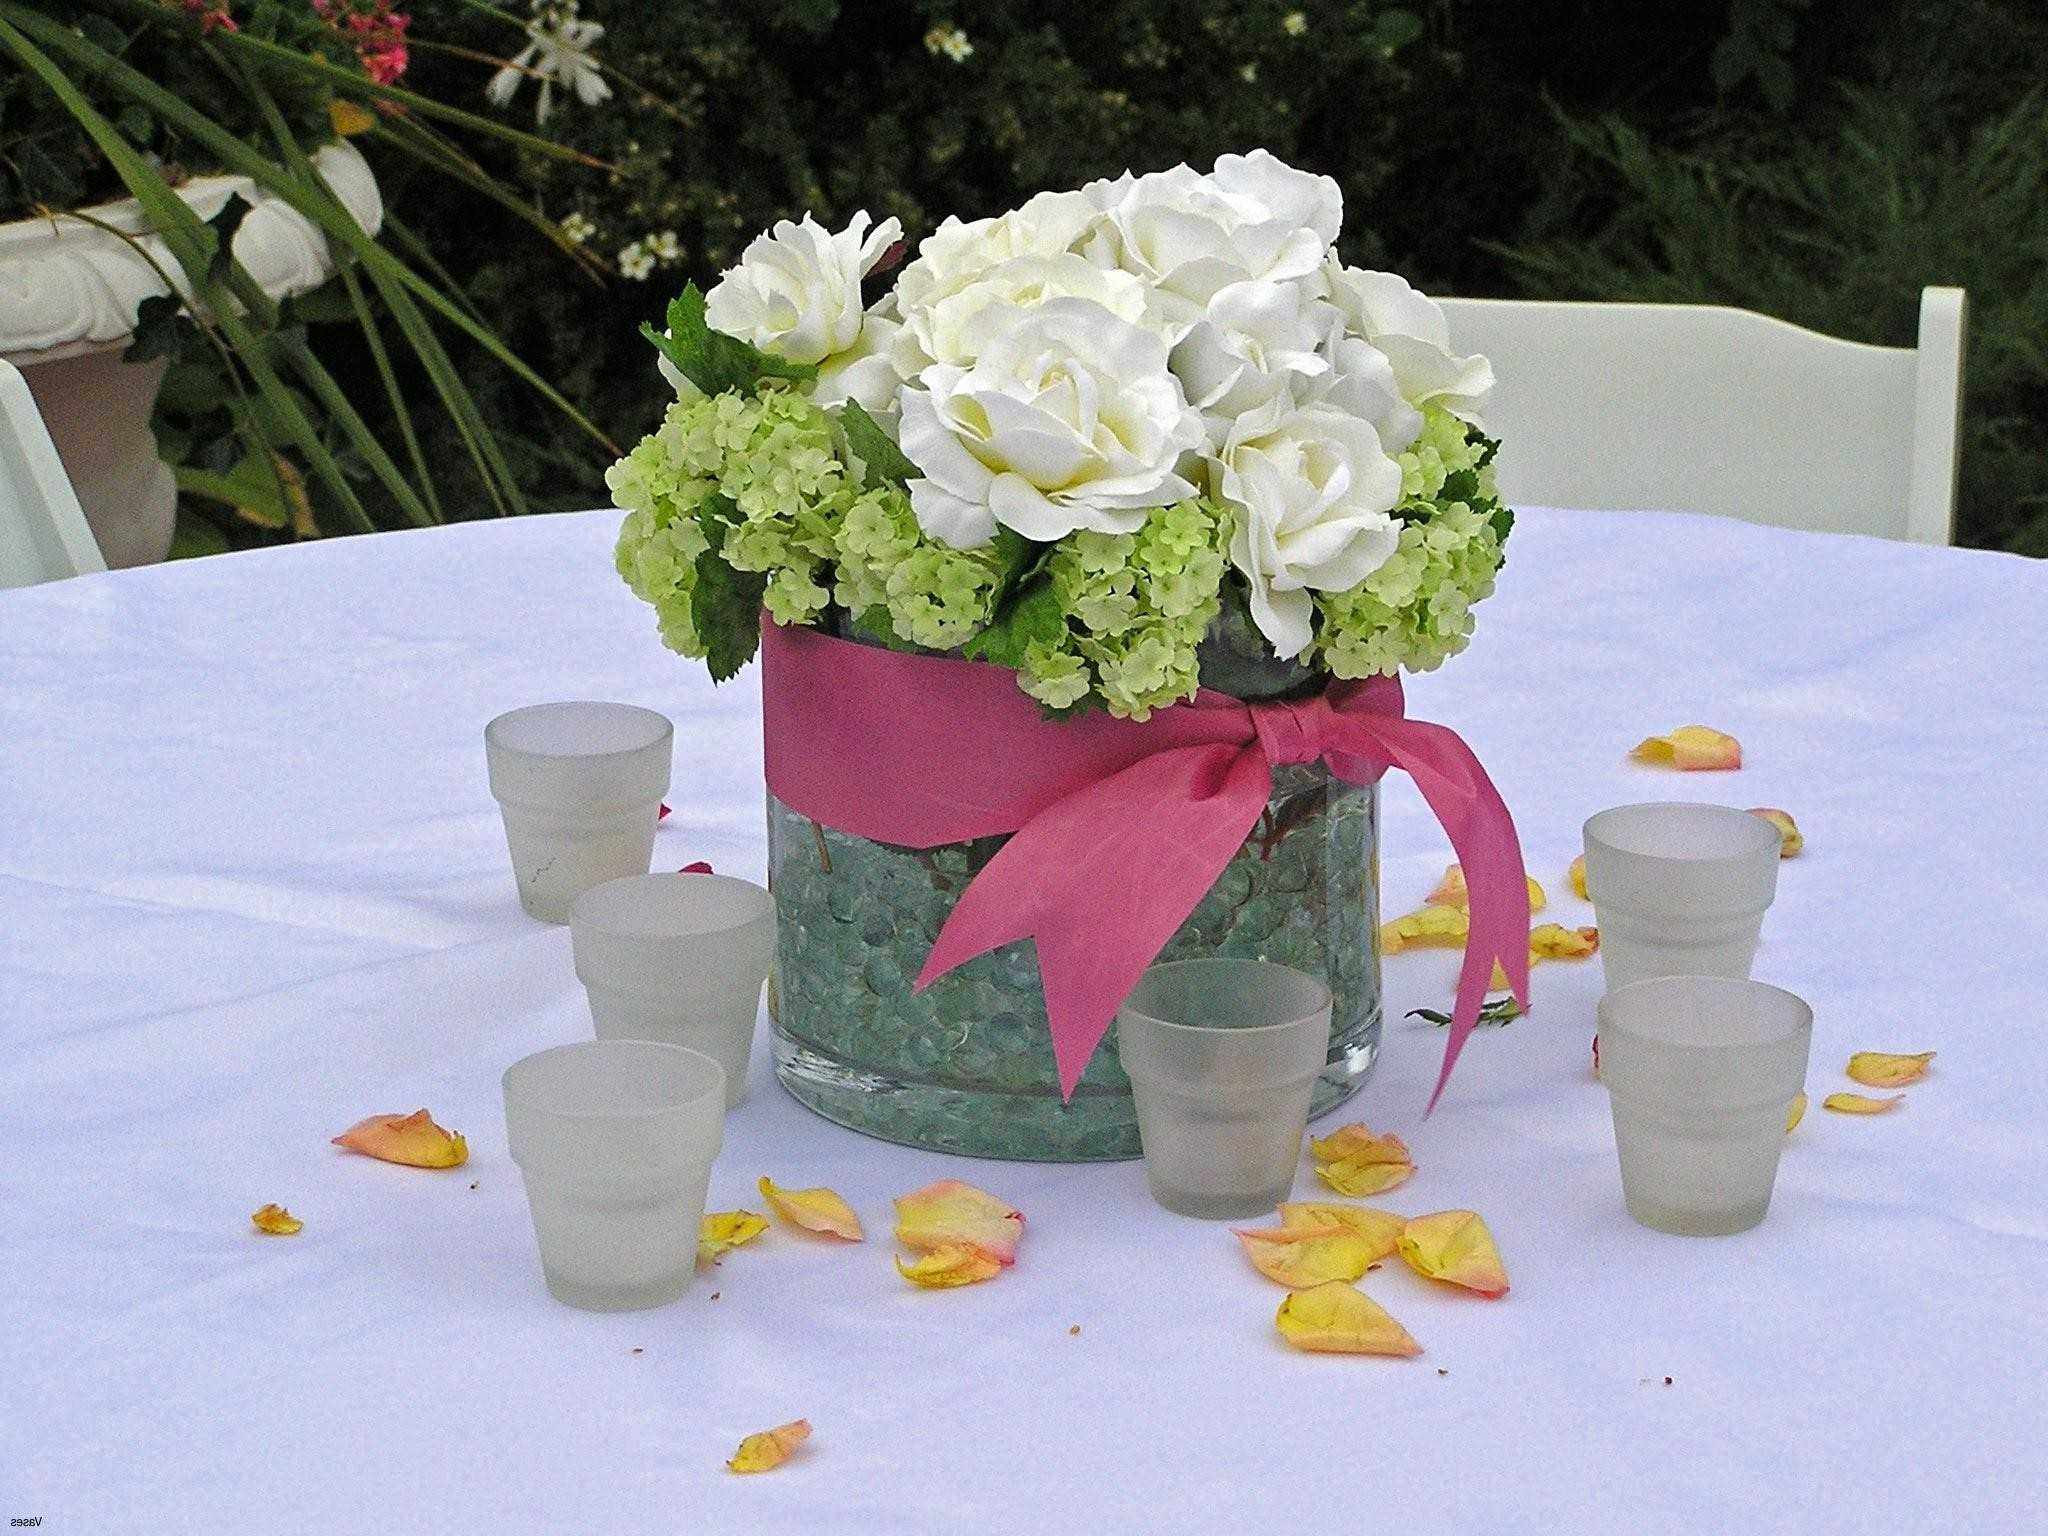 11 Awesome wholesale Bud Vases for Weddings 2024 free download wholesale bud vases for weddings of bulk wedding flowers beautiful living room awesome vases wedding with regard to bulk wedding flowers beautiful living room awesome vases wedding best chea